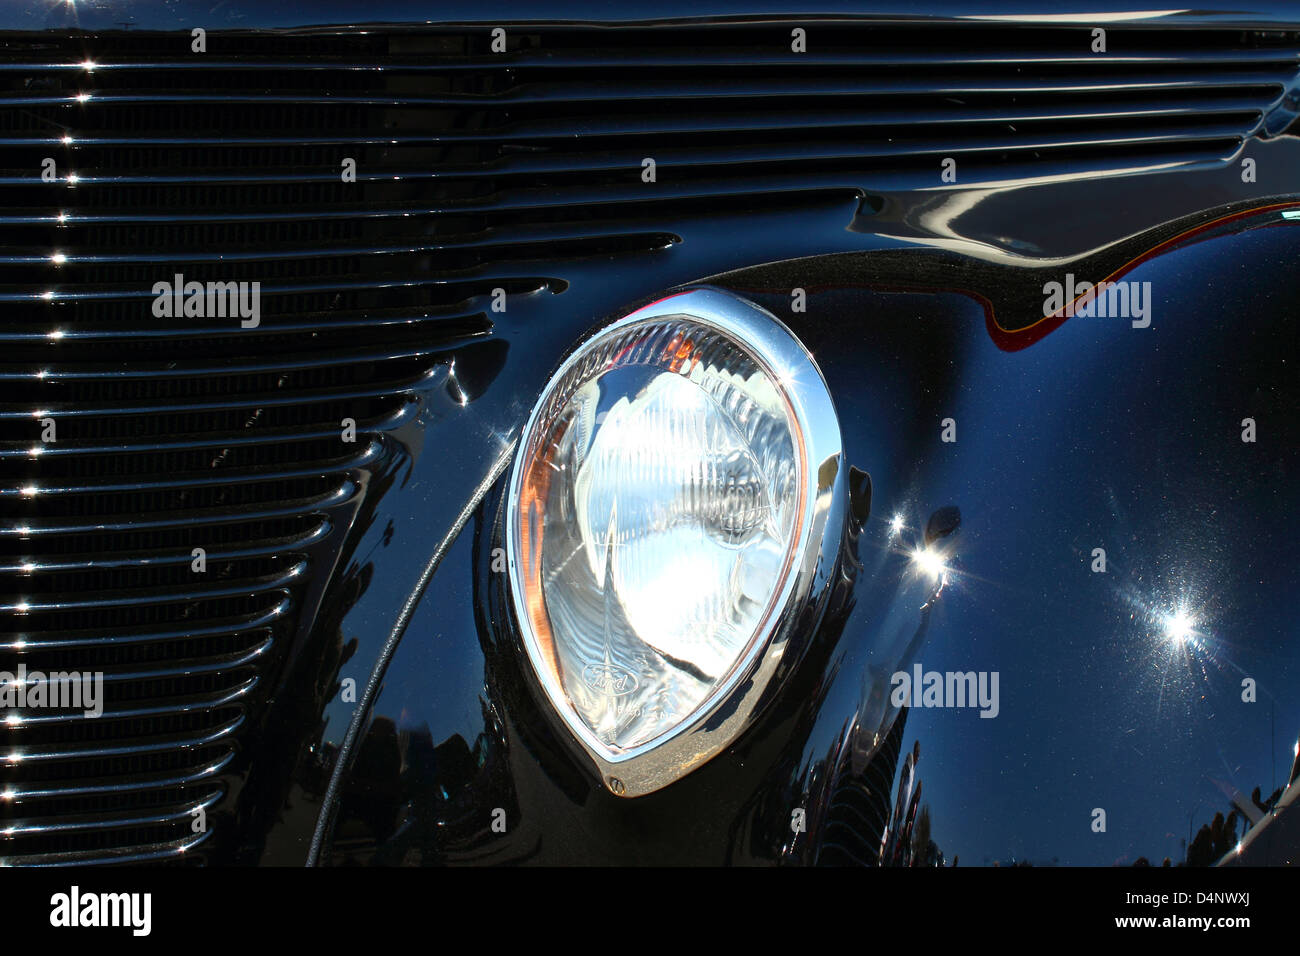 Close up view of grill and headlight on a Vintage refurbished street rod. Stock Photo